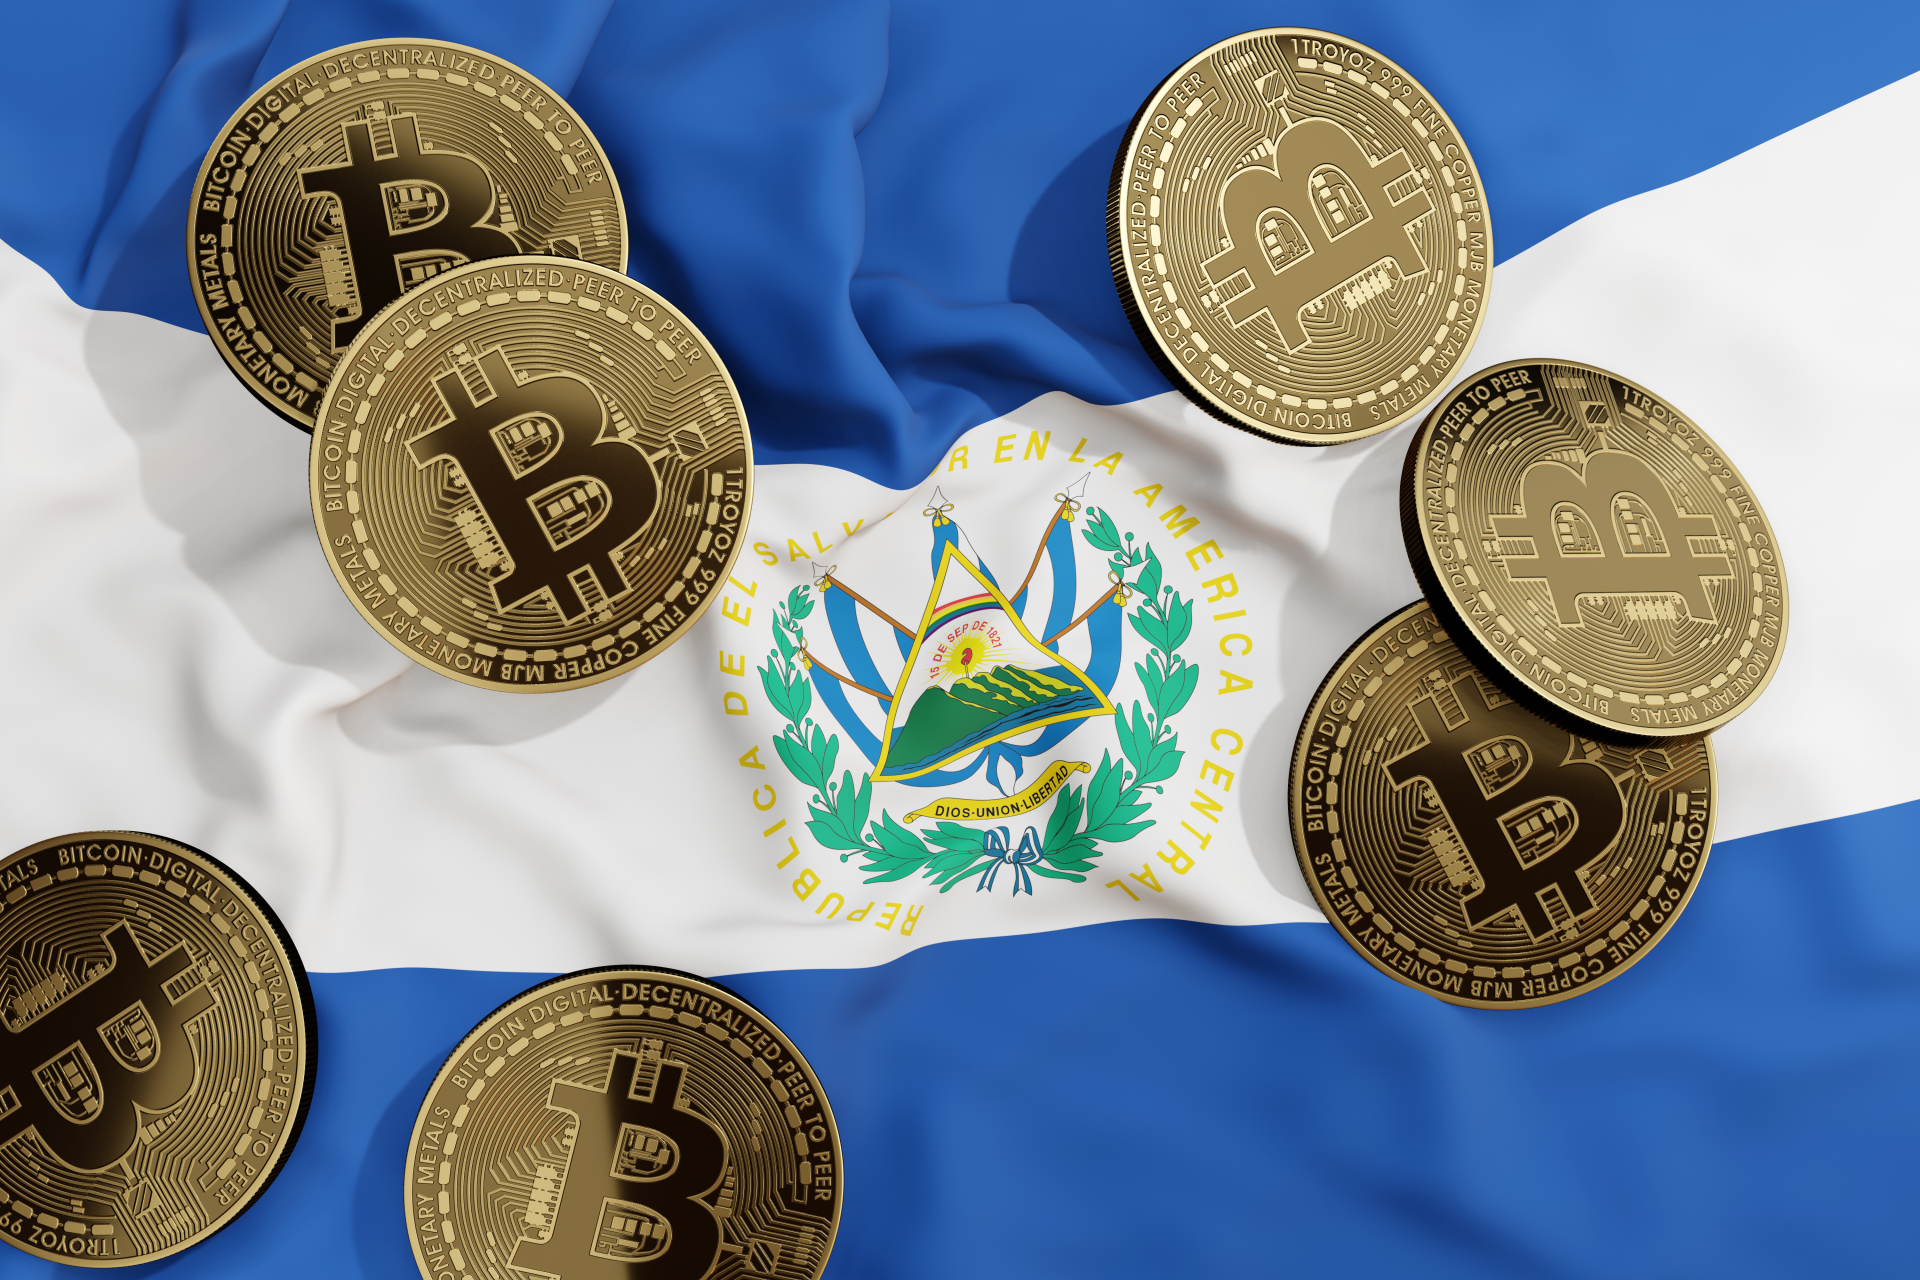 El Salvador is opening a 'Bitcoin Embassy' in the US
